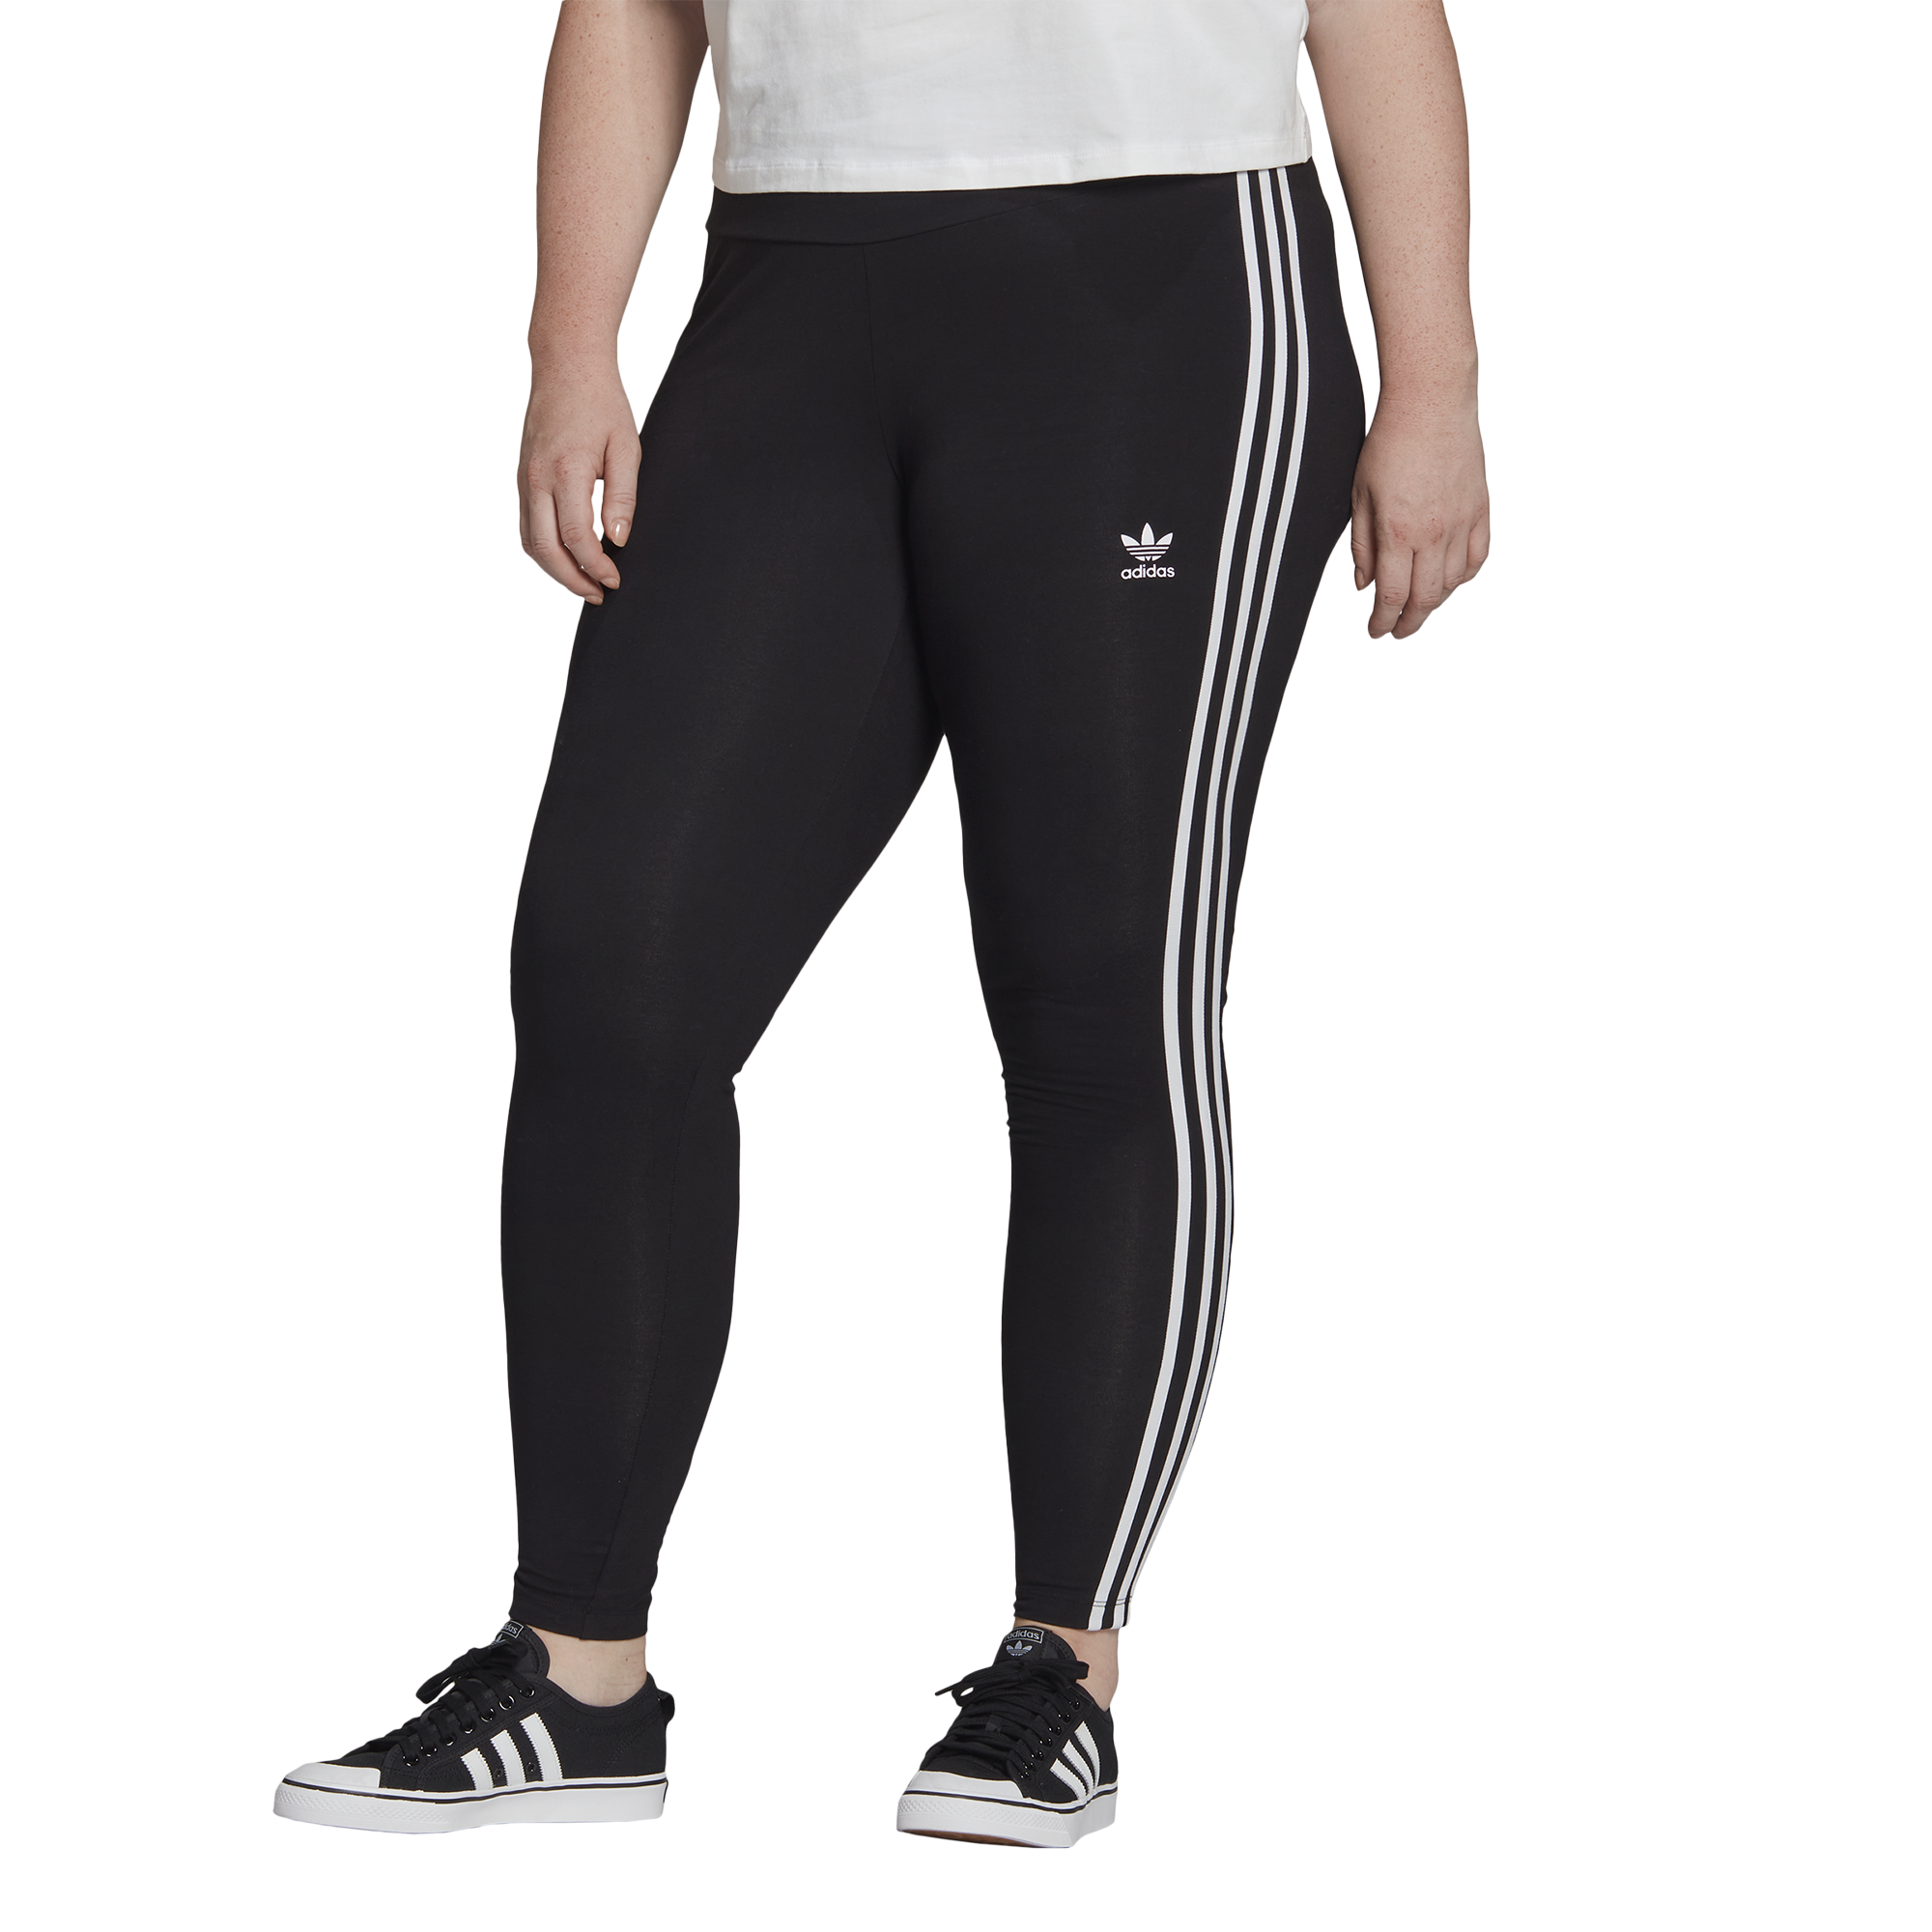 forfølgelse Tvunget forholdet Adidas Originals Adicolor Classics 3-Stripes Tights (Plus Size) - Women's |  The Shops at Willow Bend